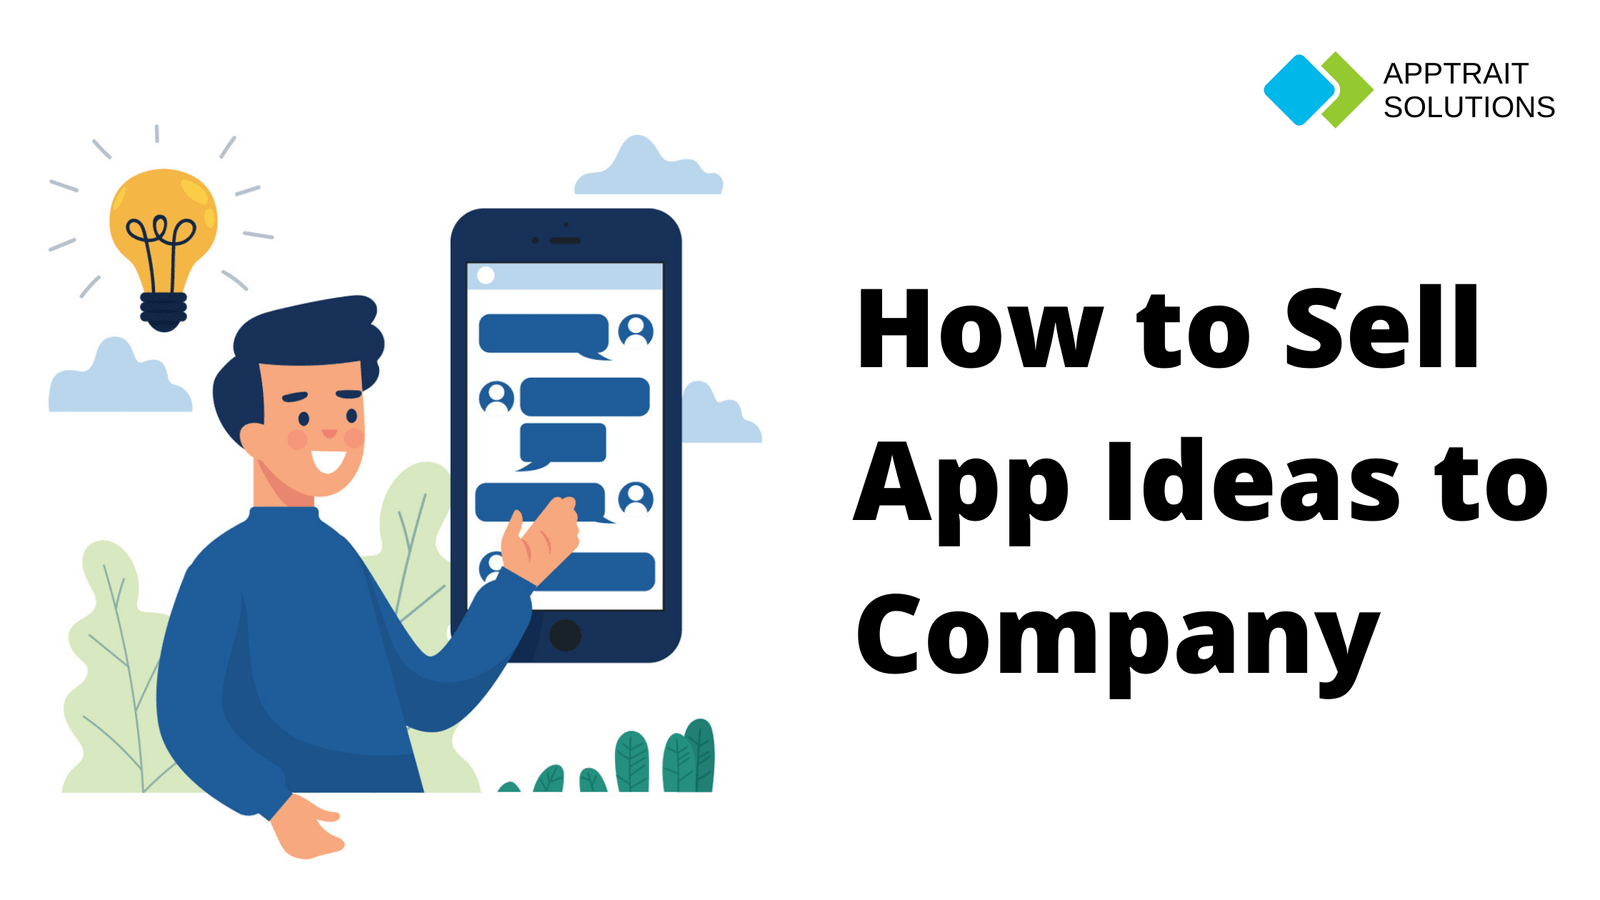 How to Sell App Ideas to Company in 2022